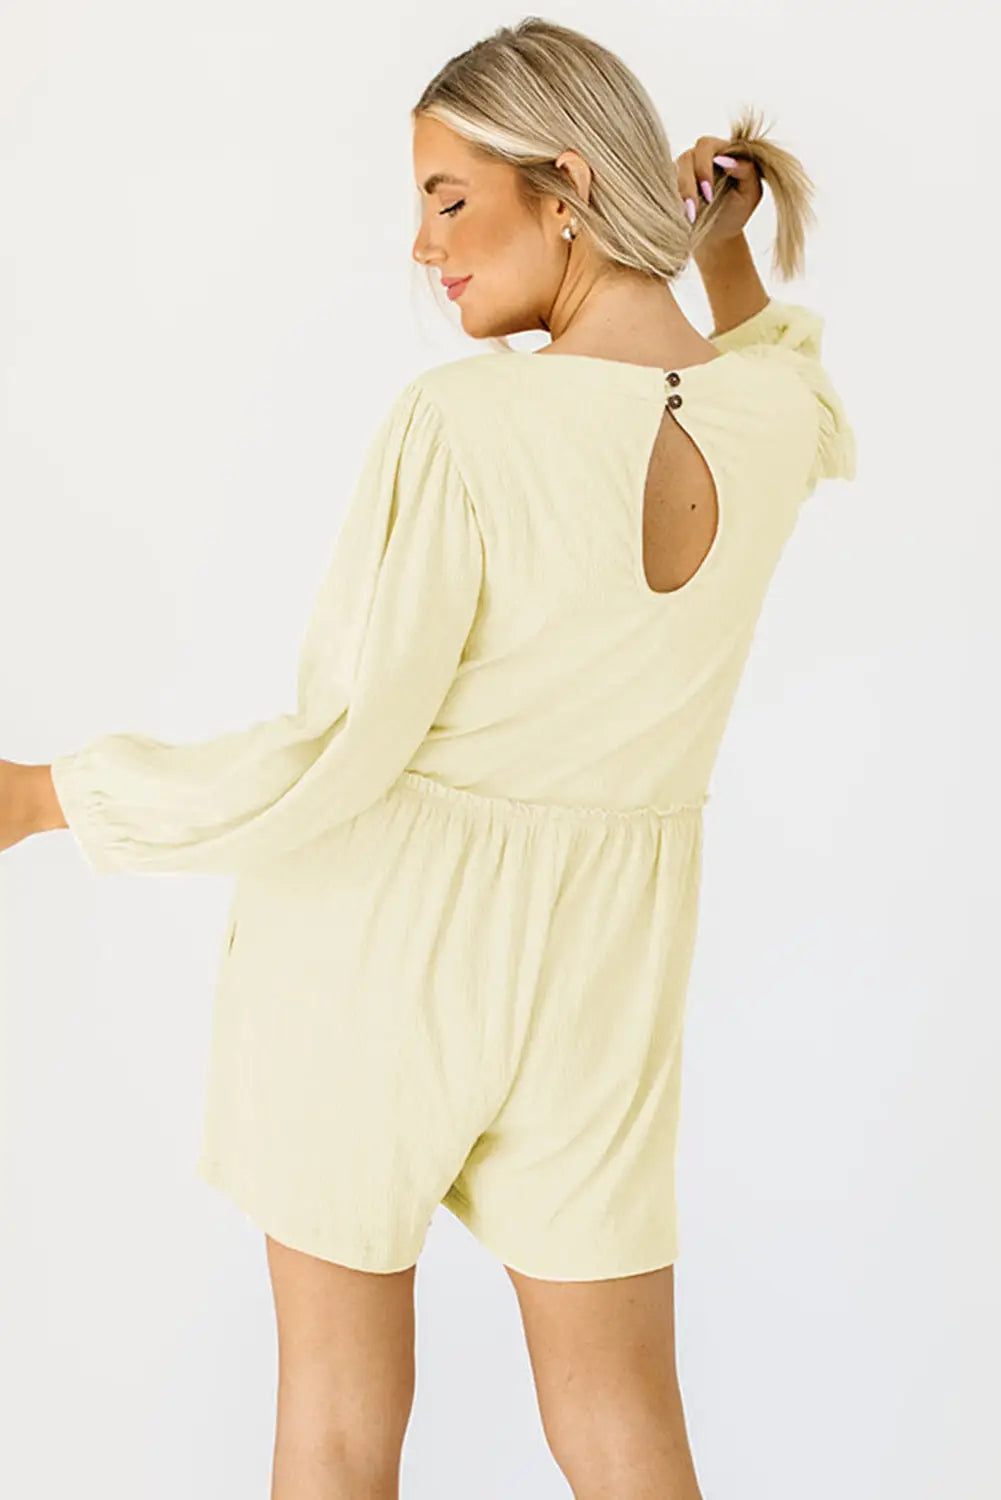 Apricot solid color high waist long sleeve romper - bottoms